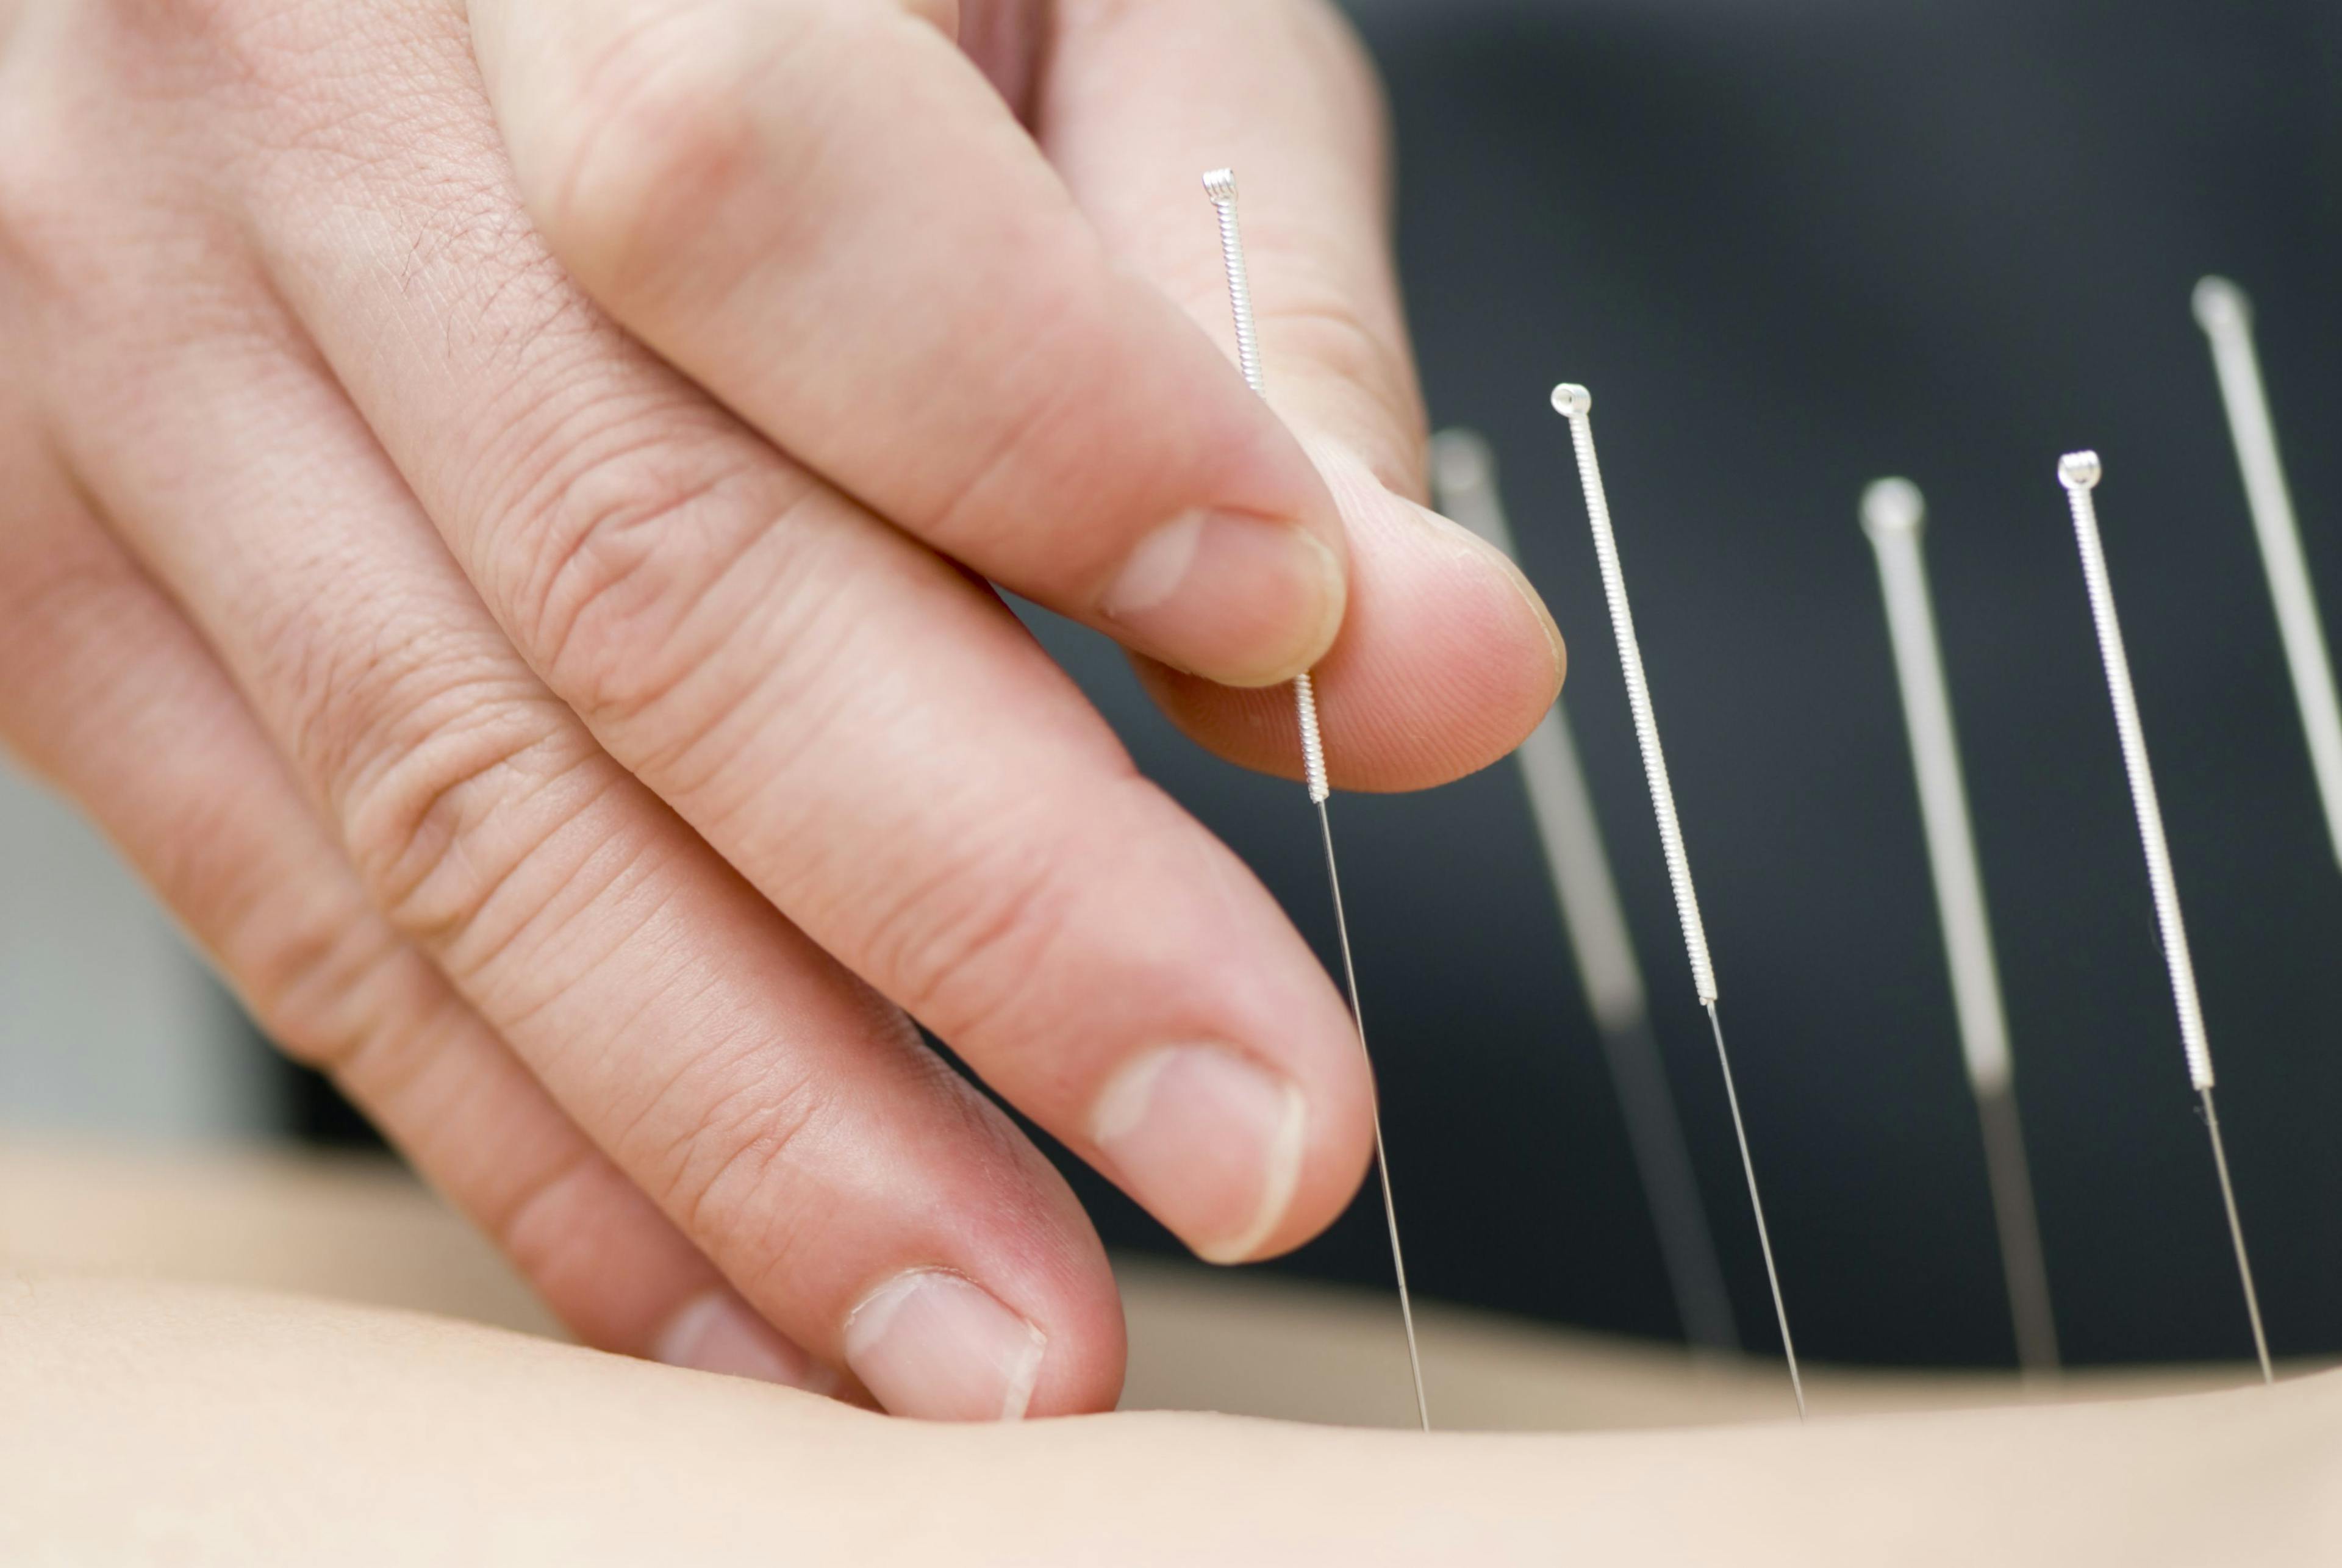 acupuncture needles being place in a person's back